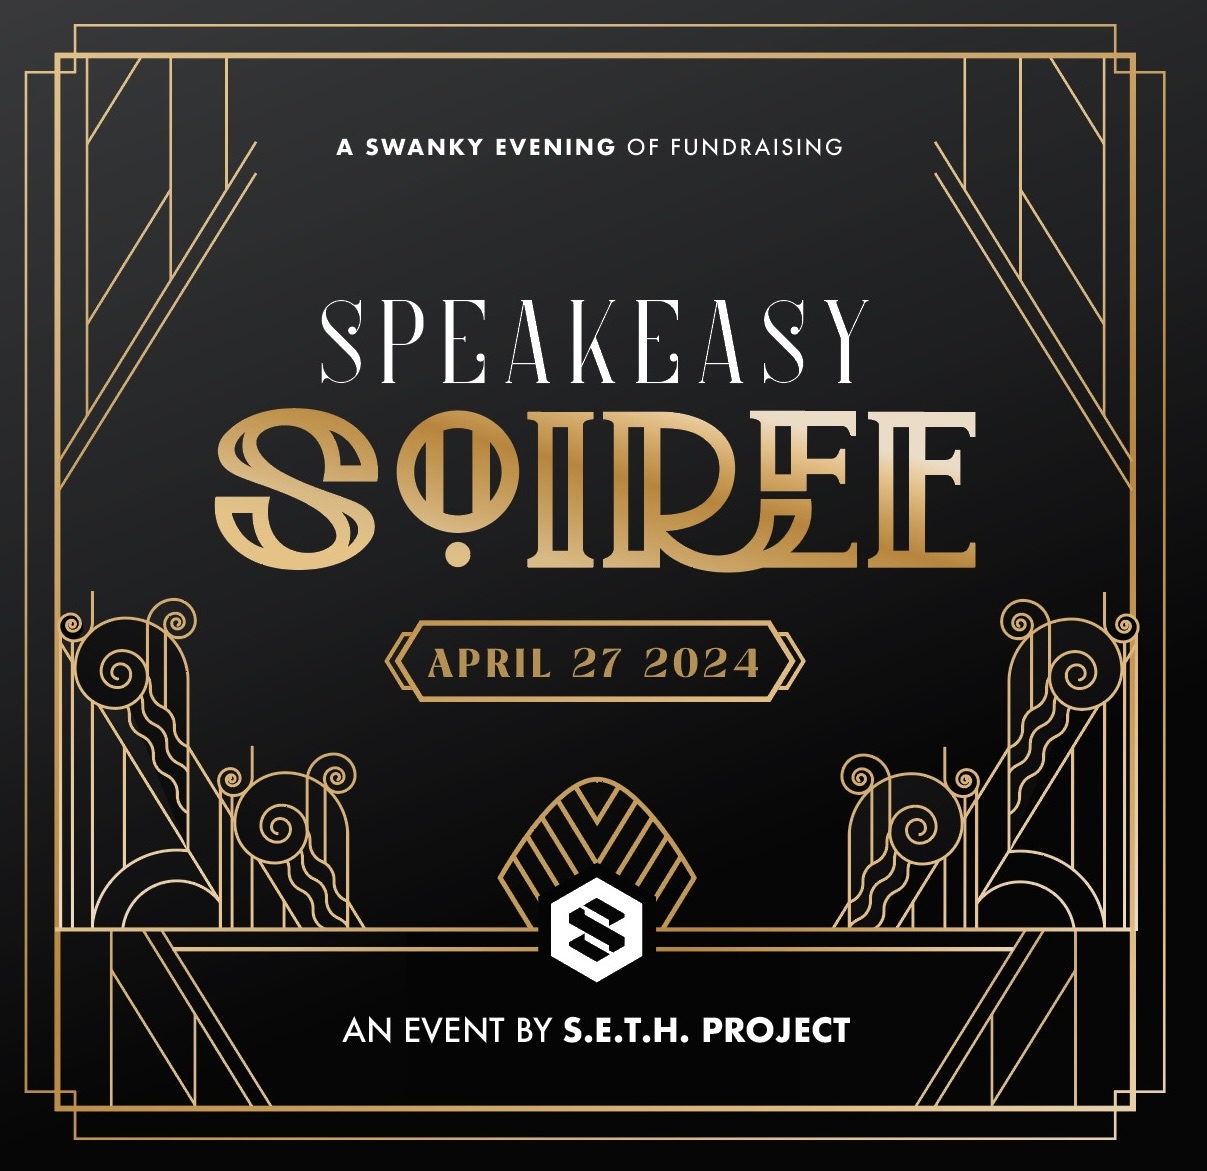 Speakeasy Soiree – A Party to #EndALS